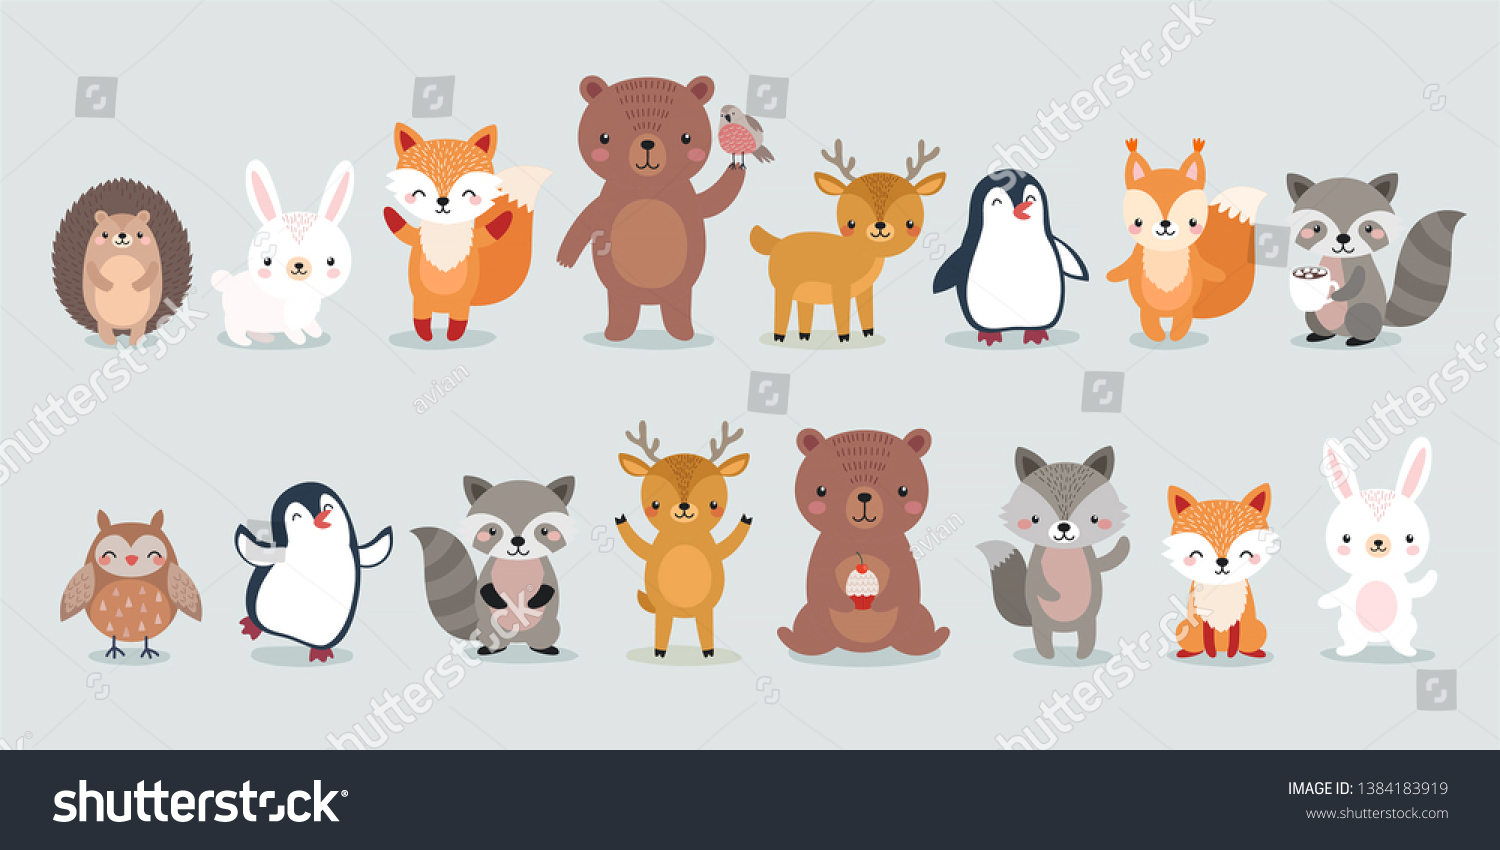 SVG of woodland characters -  bear, fox, raccoon, hedgehog, penguin, deer, rabbit, owl and squirrel. Cute forest animals. Vector illustration. svg